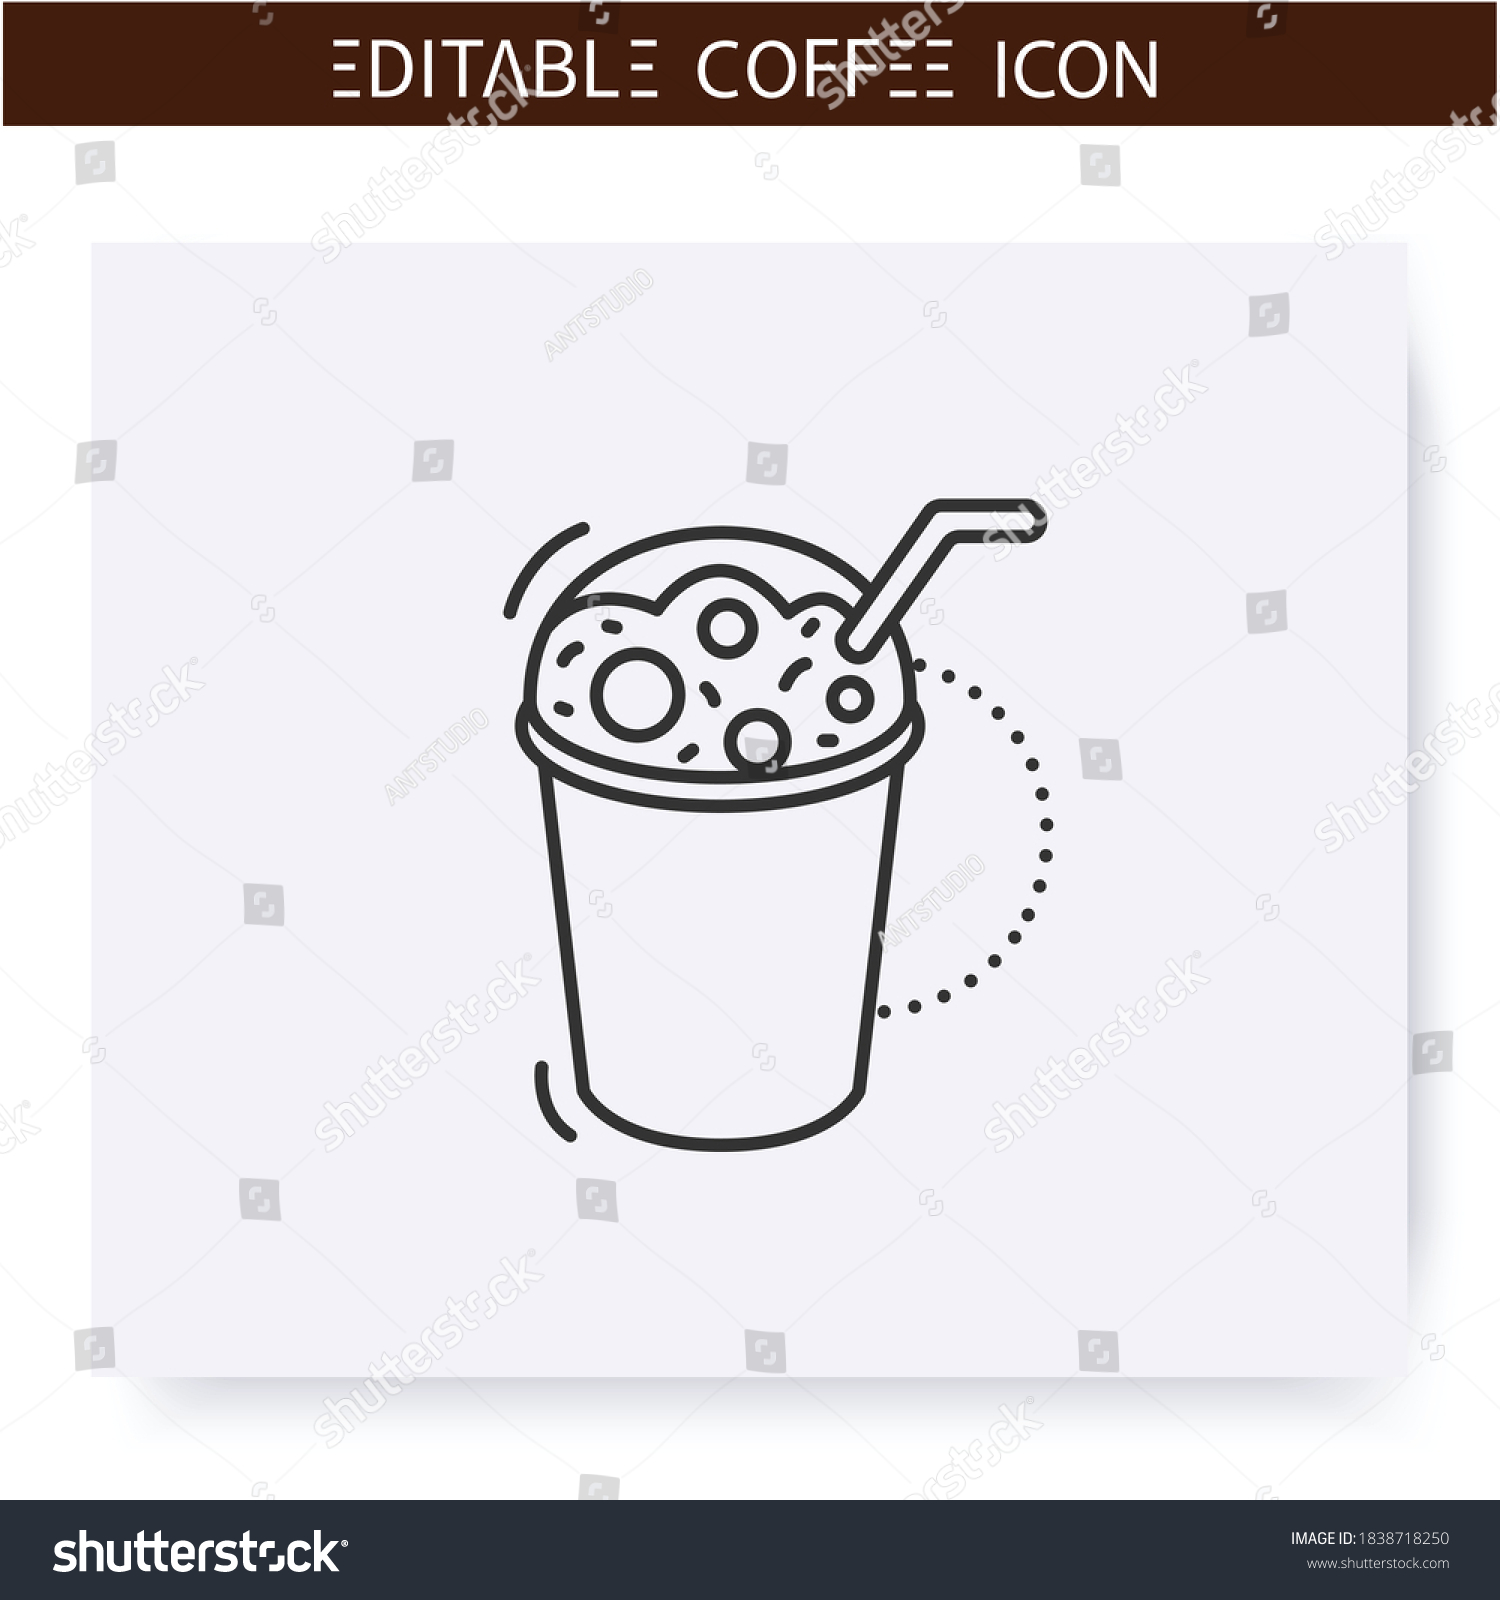 SVG of Frappe coffee line icon.Type of coffee drink. Iced drink with water, sugar, and milk. Coffeehouse menu. Different caffeine drinks receipts concept. Isolated vector illustration. Editable stroke svg